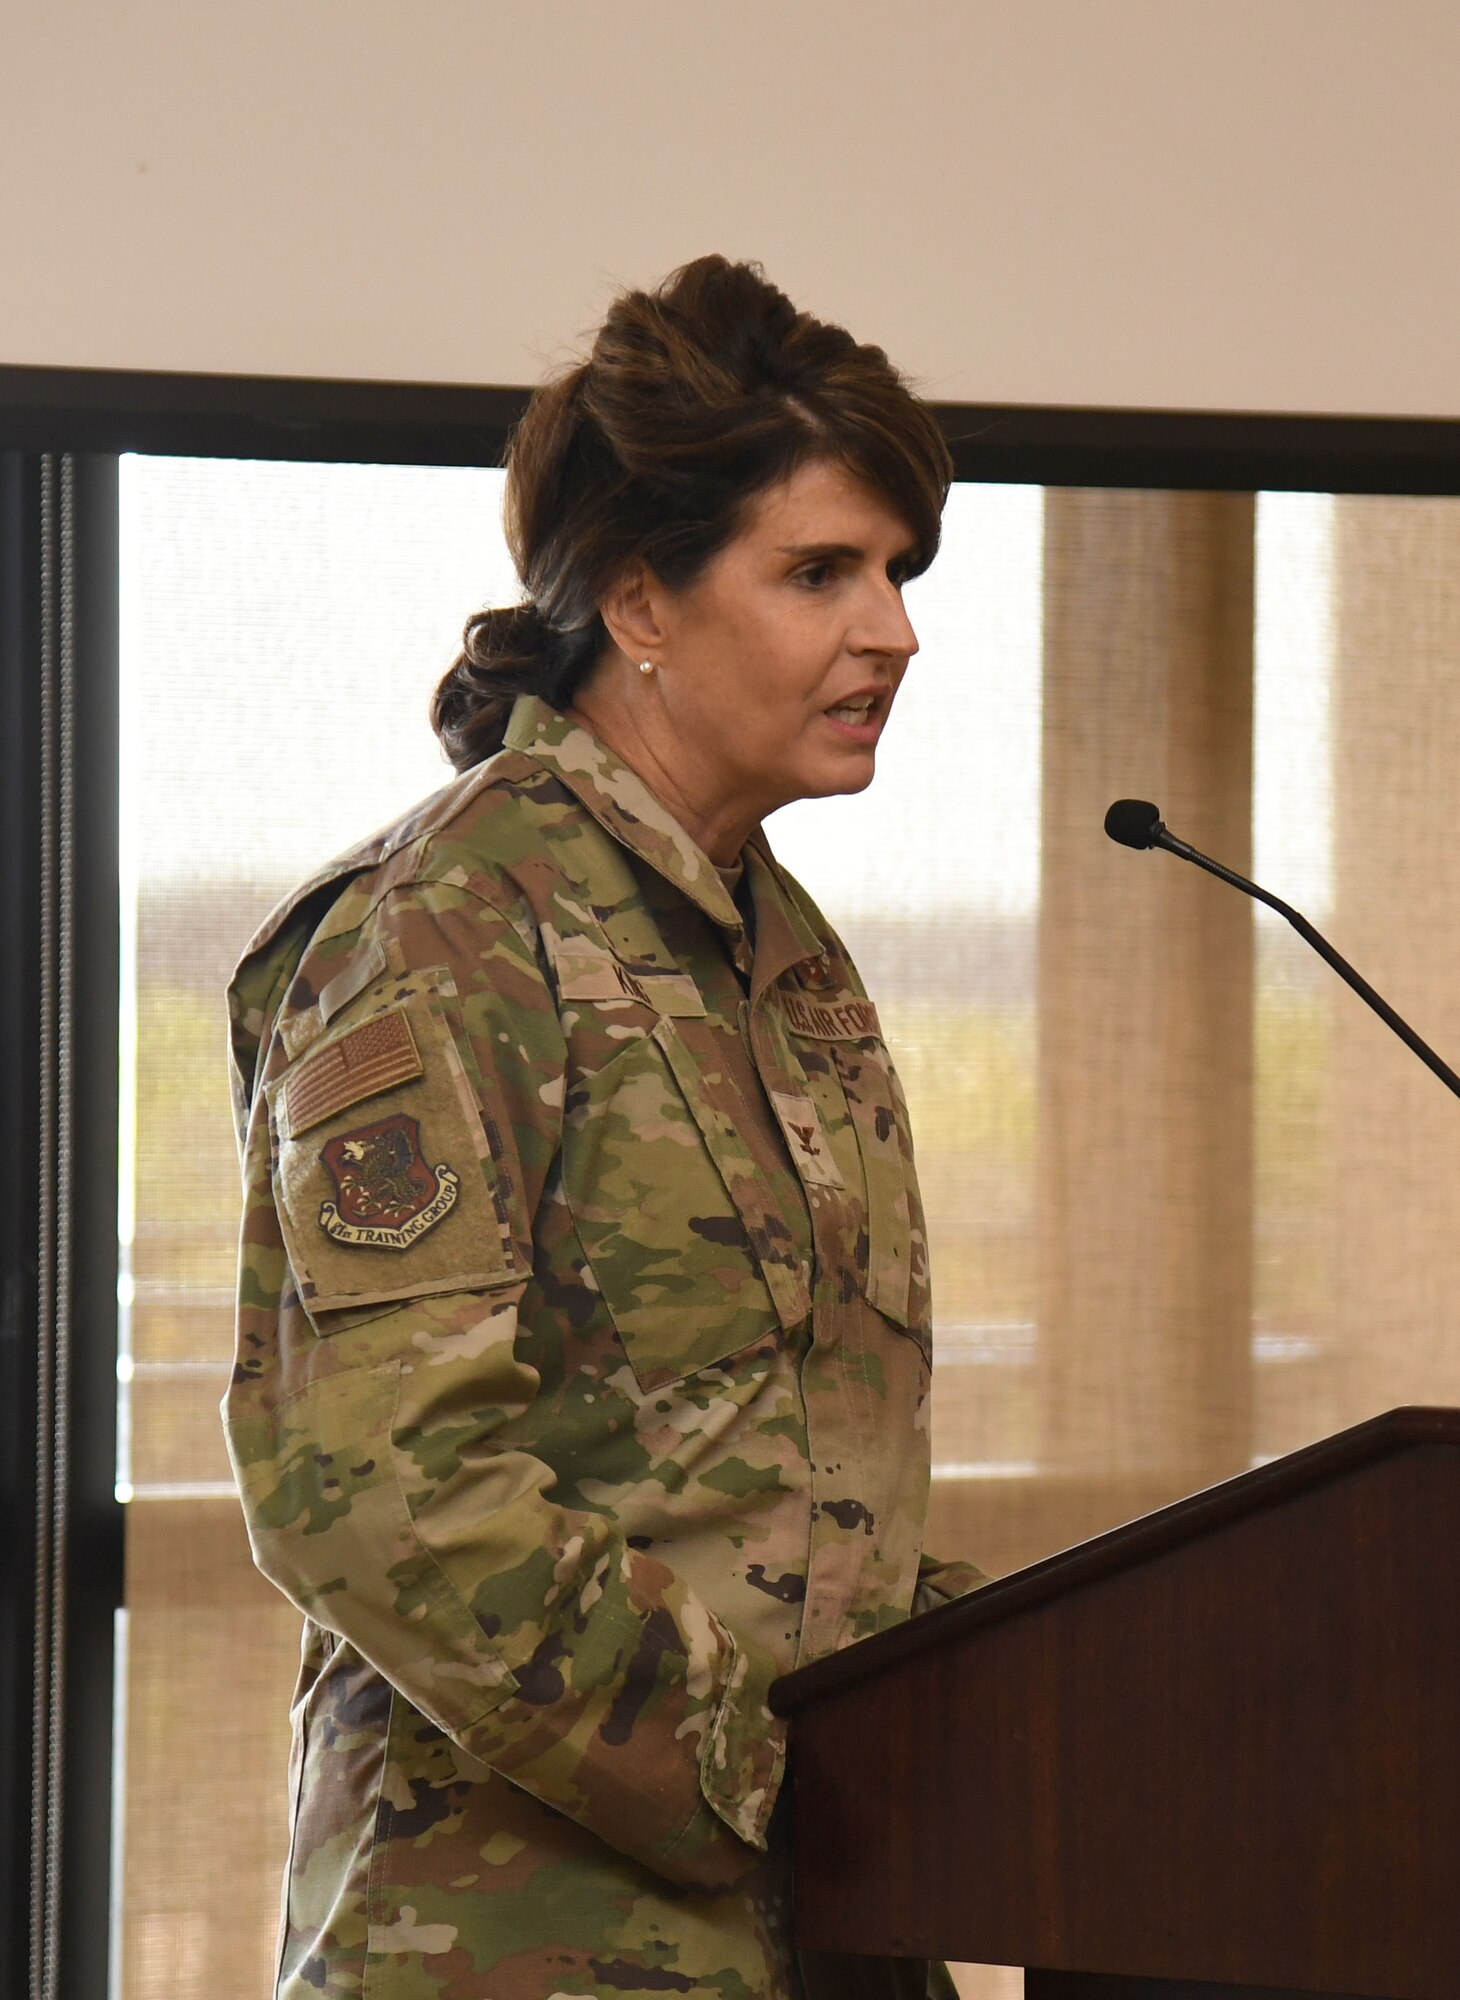 U.S. Air Force Col. Laura King, 81st Training Group commander, delivers a brief during the Industry Day Exchange Proposed Mixed-Use Enhanced Use Lease meeting inside the Bay Breeze Event Center at Keesler Air Force Base, Mississippi, Sept. 15, 2022. The Air Force Civil Engineer Center and 81st Training Wing hosted the event to explore the possibility of a Cyber Processing Center opportunity at Keesler. (U.S. Air Force photo by Kemberly Groue)